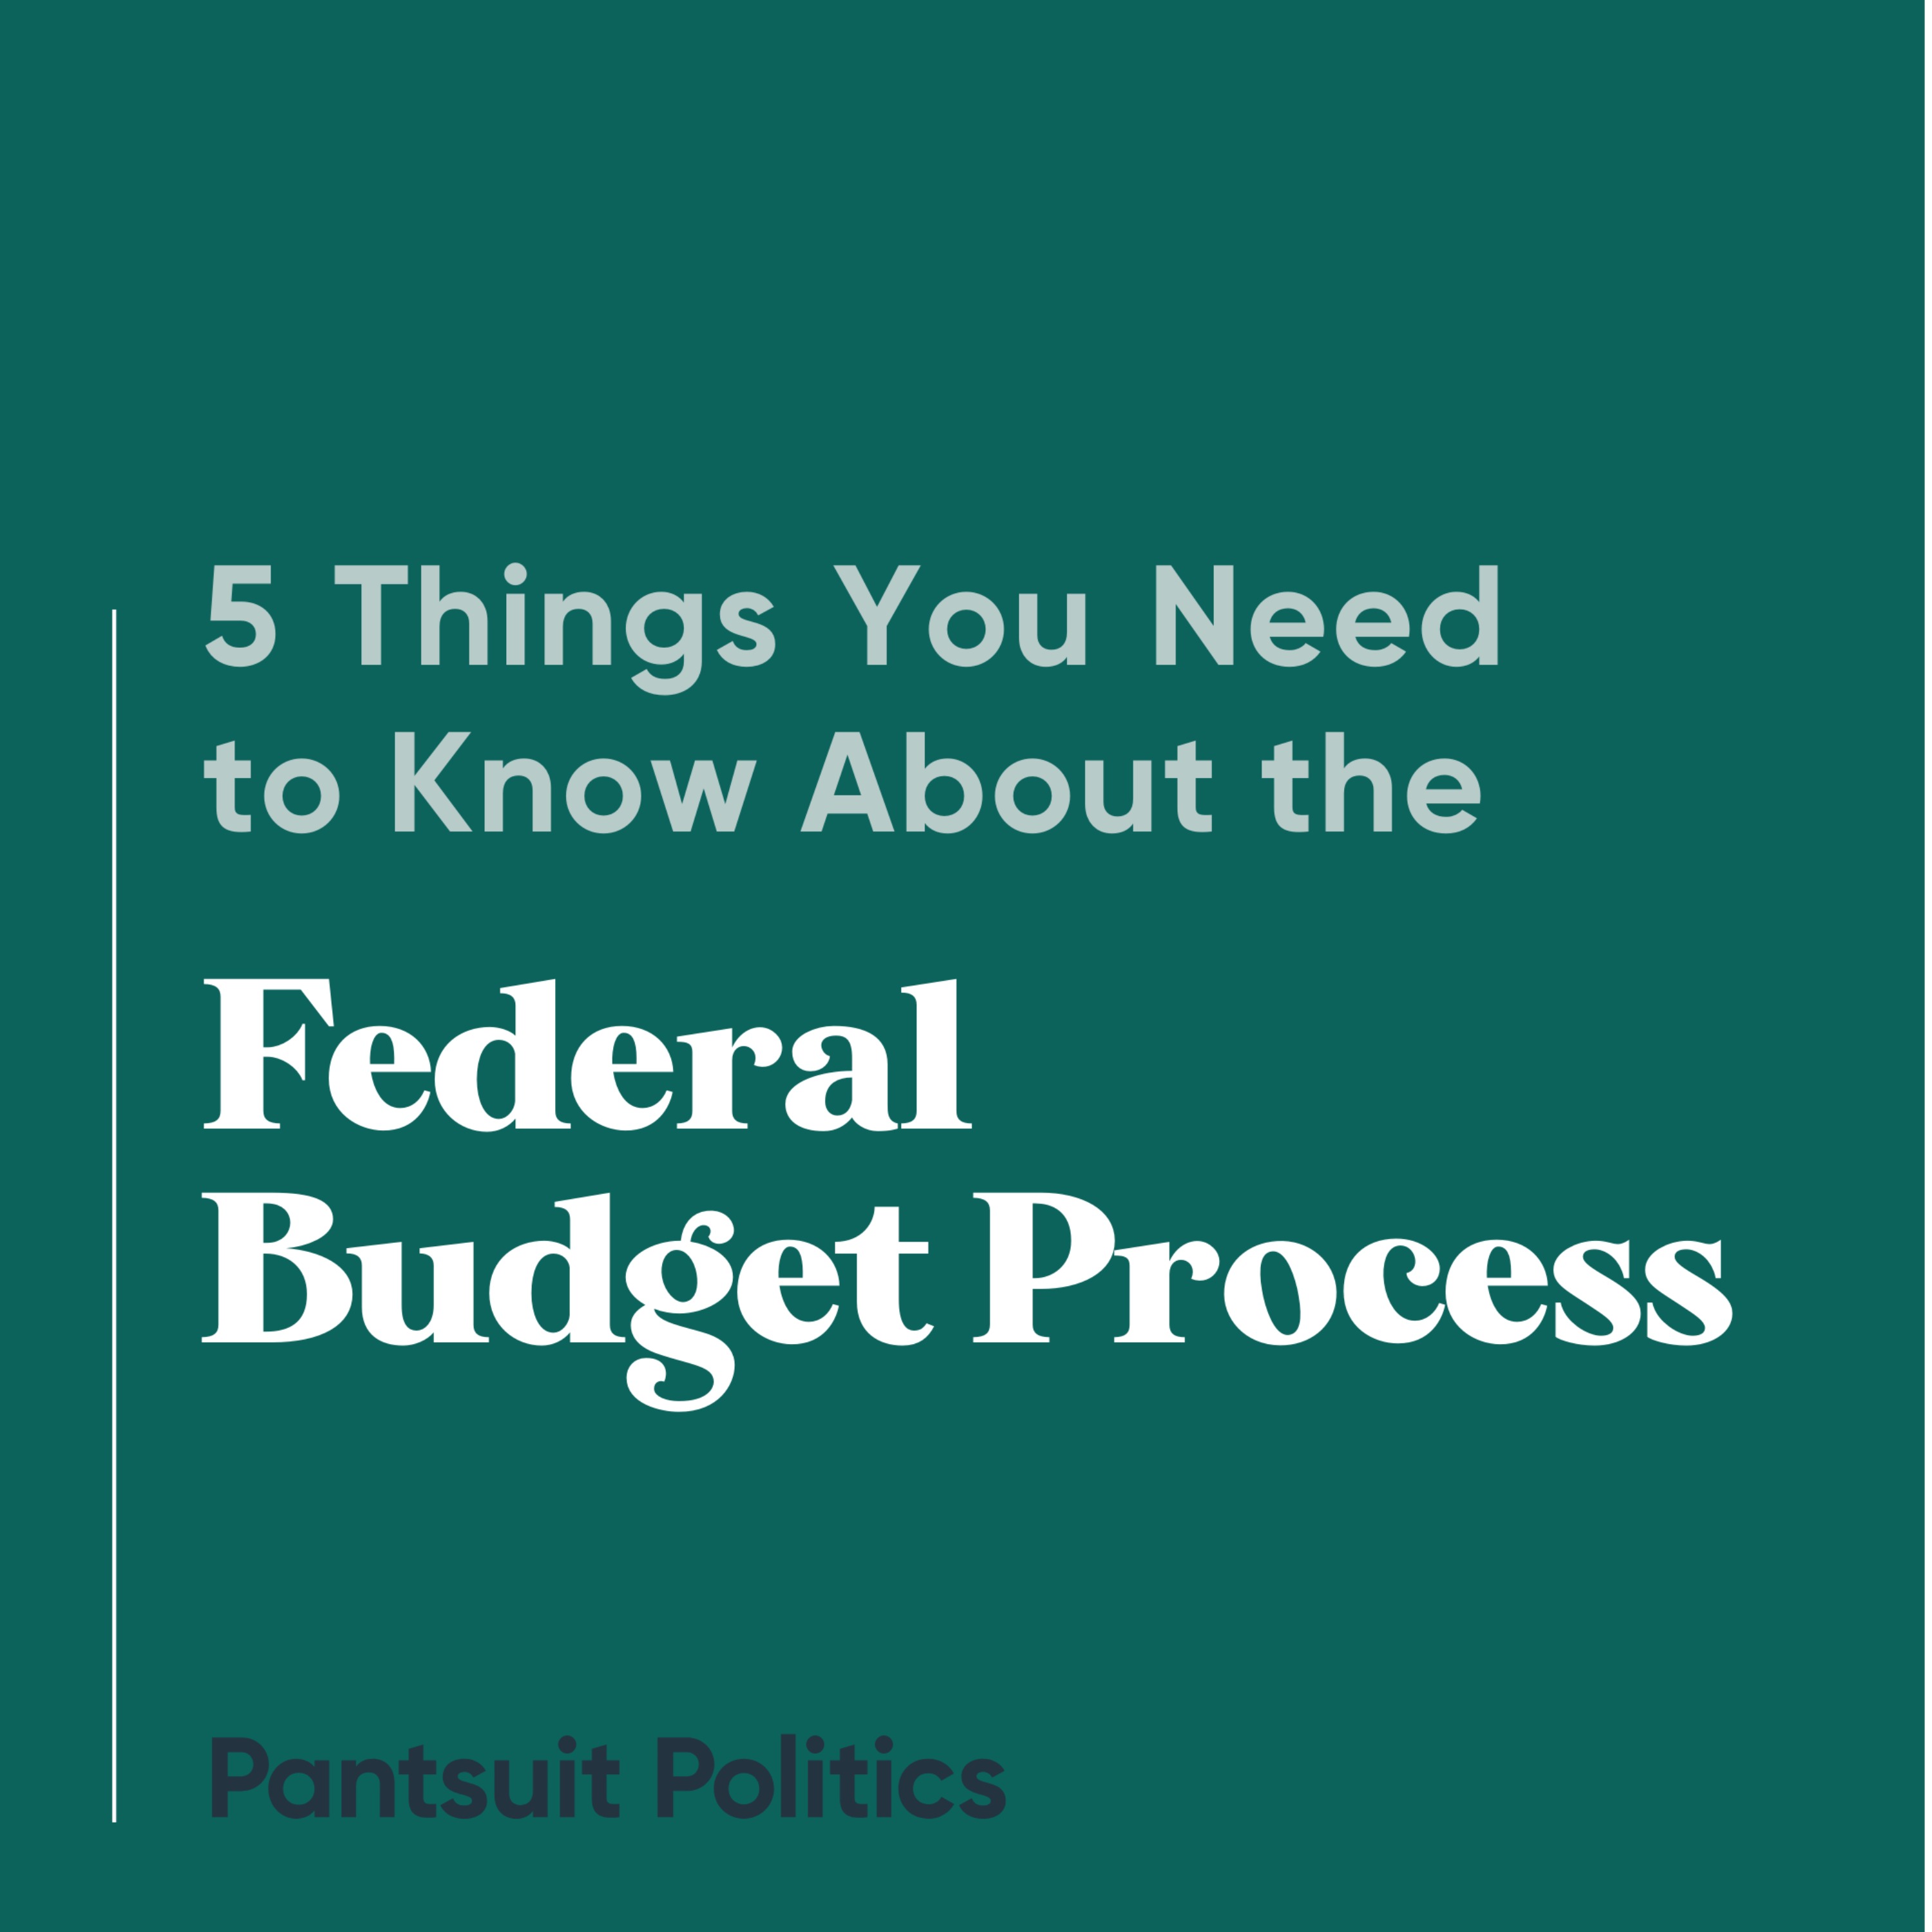 5 Things You Need to Know About the Federal Budget Process